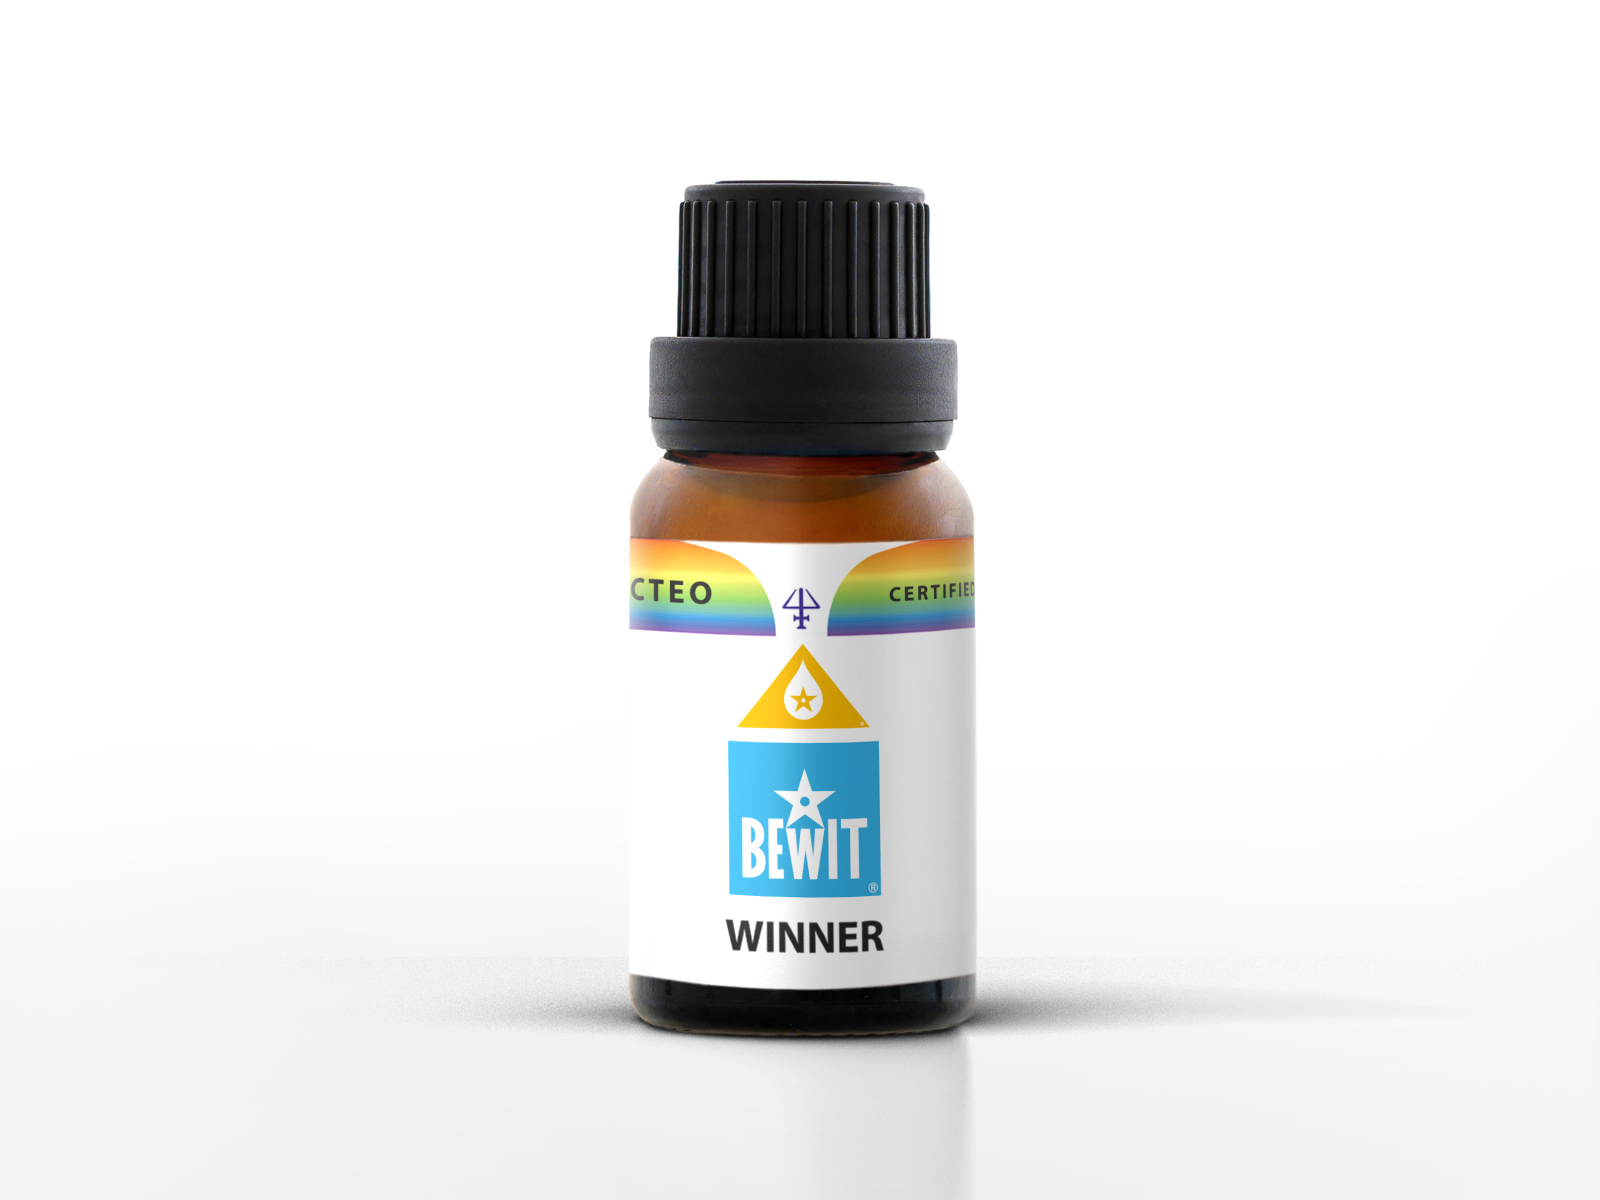 BEWIT WINNER - A unique blend of the essential oils